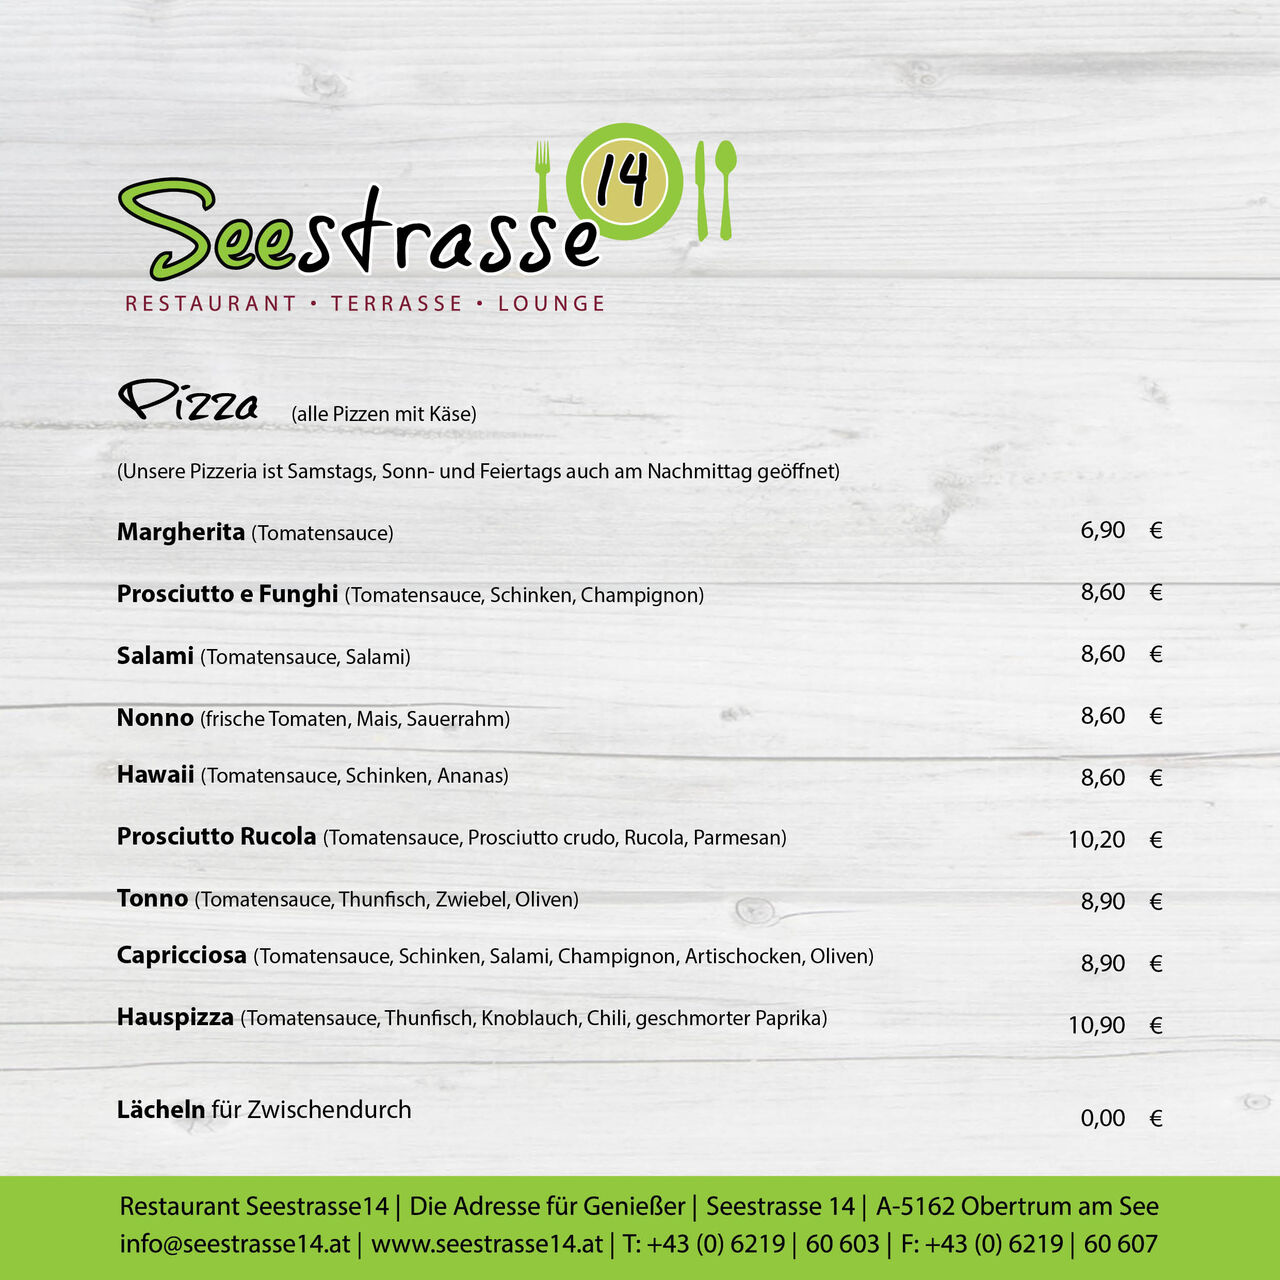 A photo of Seestrasse 14